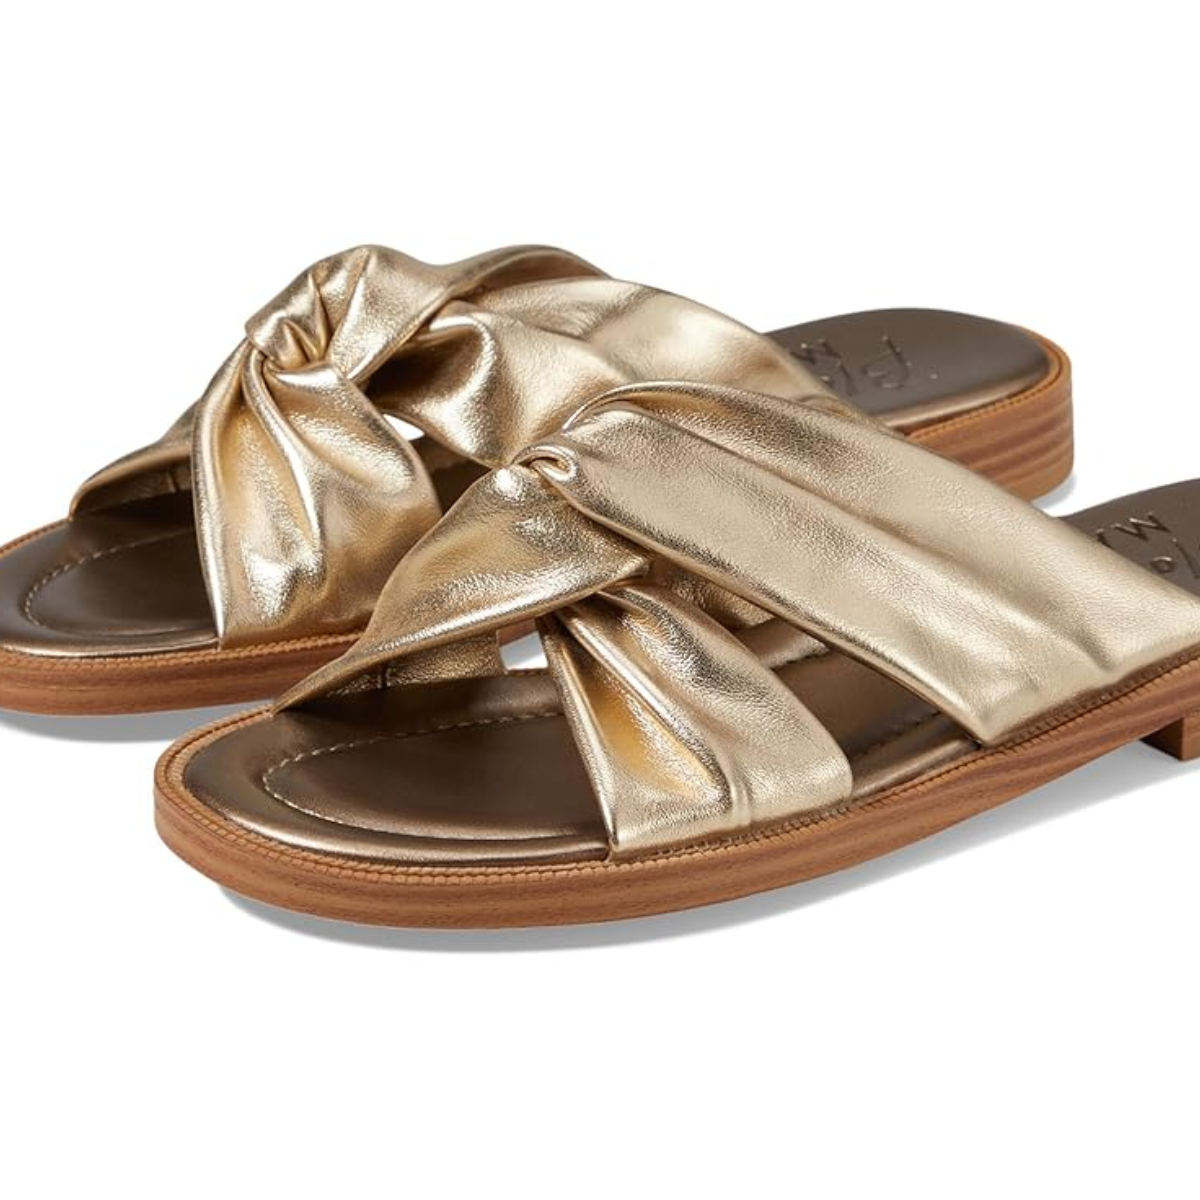 A pair of metallic gold Adios sandals by Blowfish with knotted bow details and a BLOOM foam footbed.